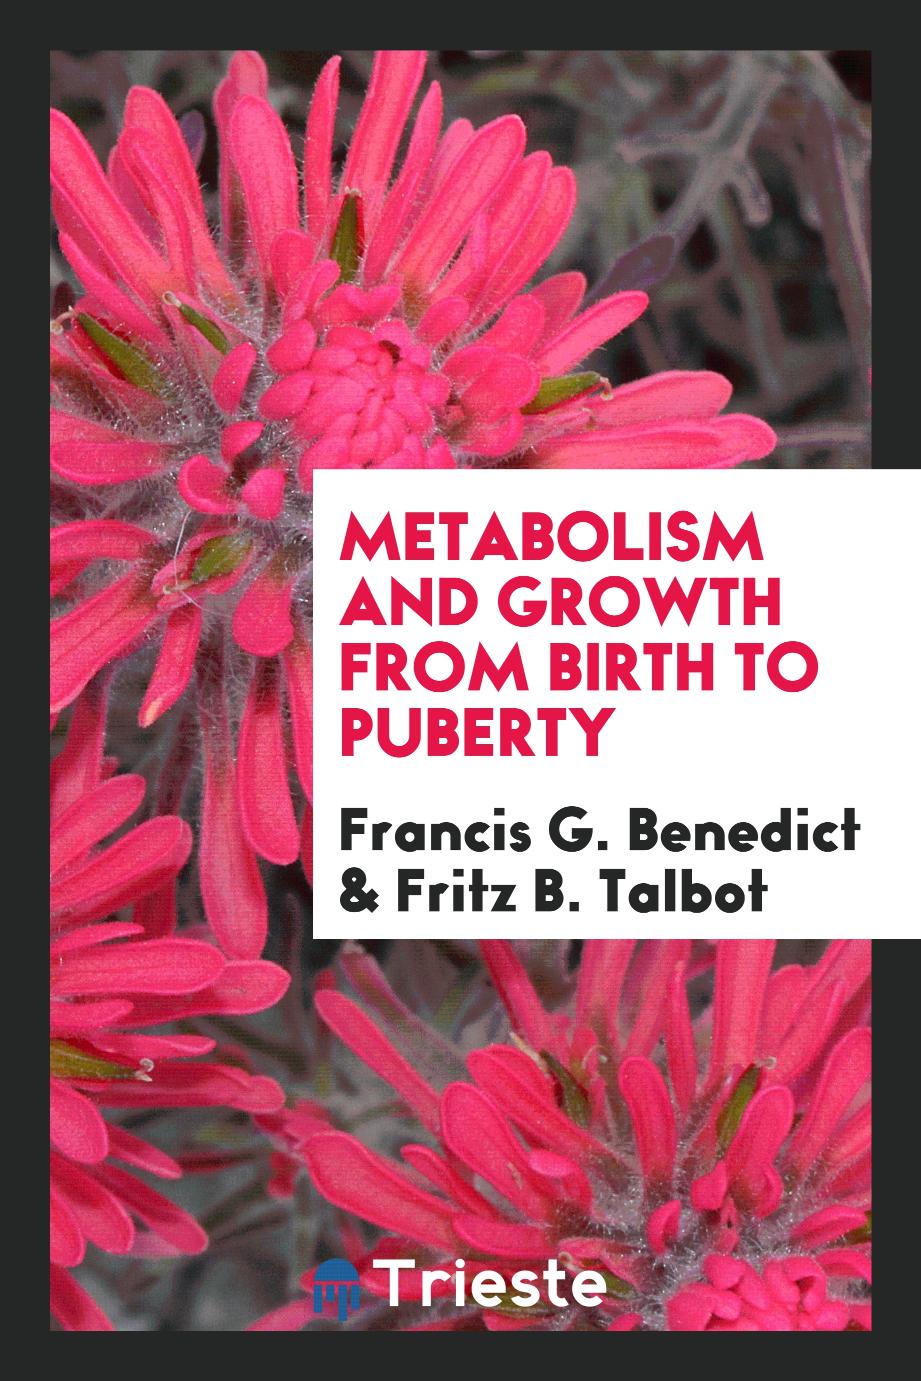 Metabolism and growth from birth to puberty